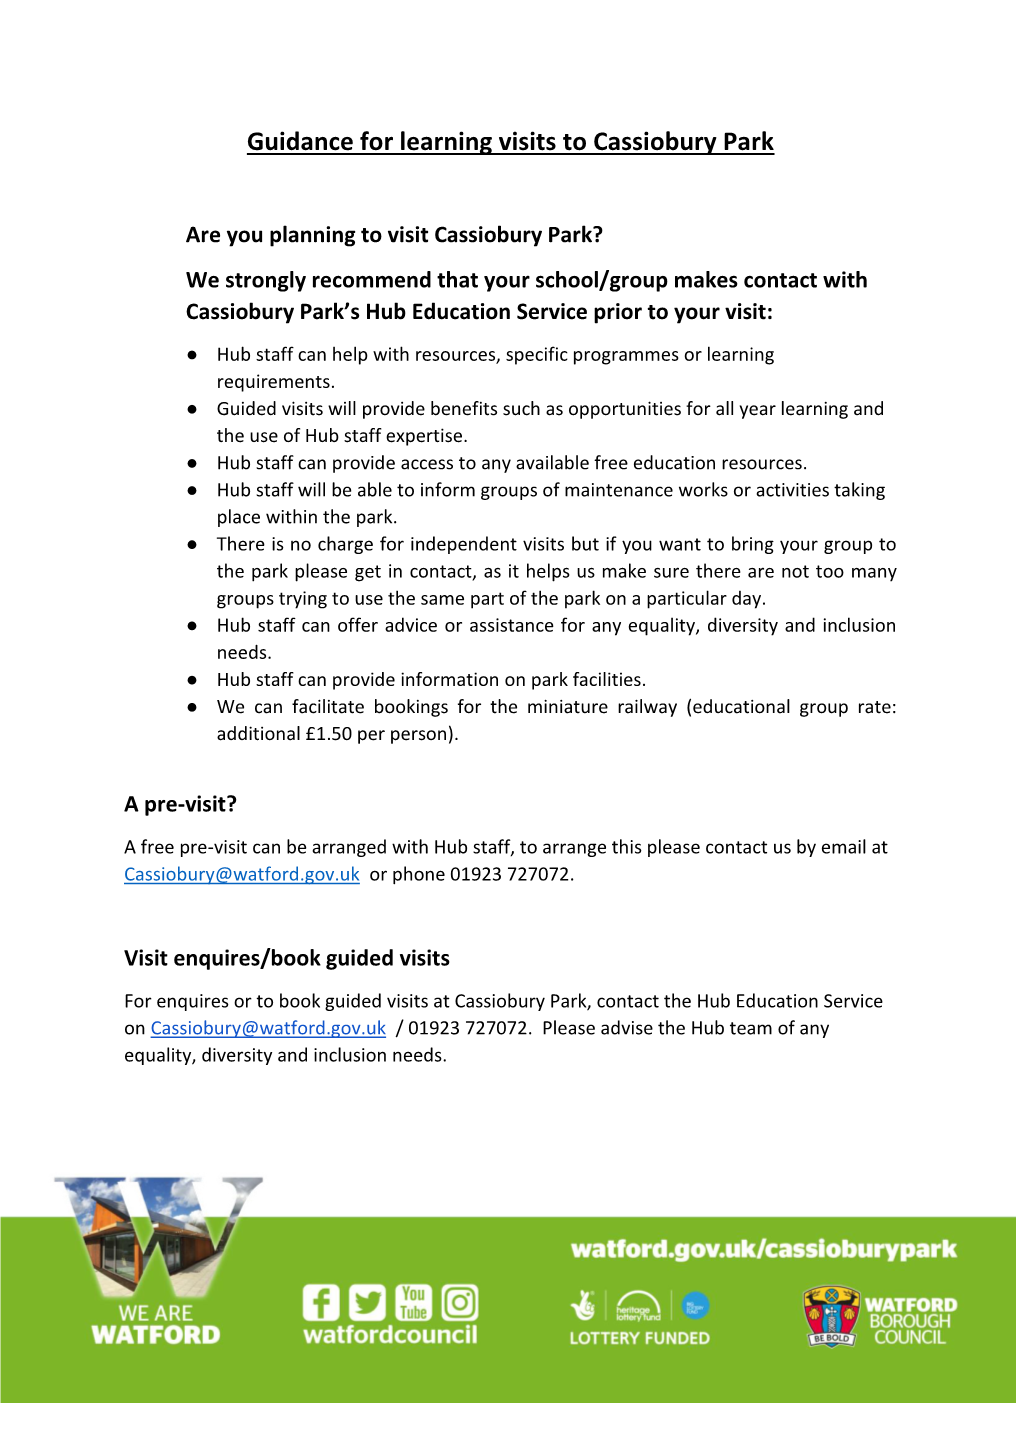 Guidance for Learning Visits to Cassiobury Park